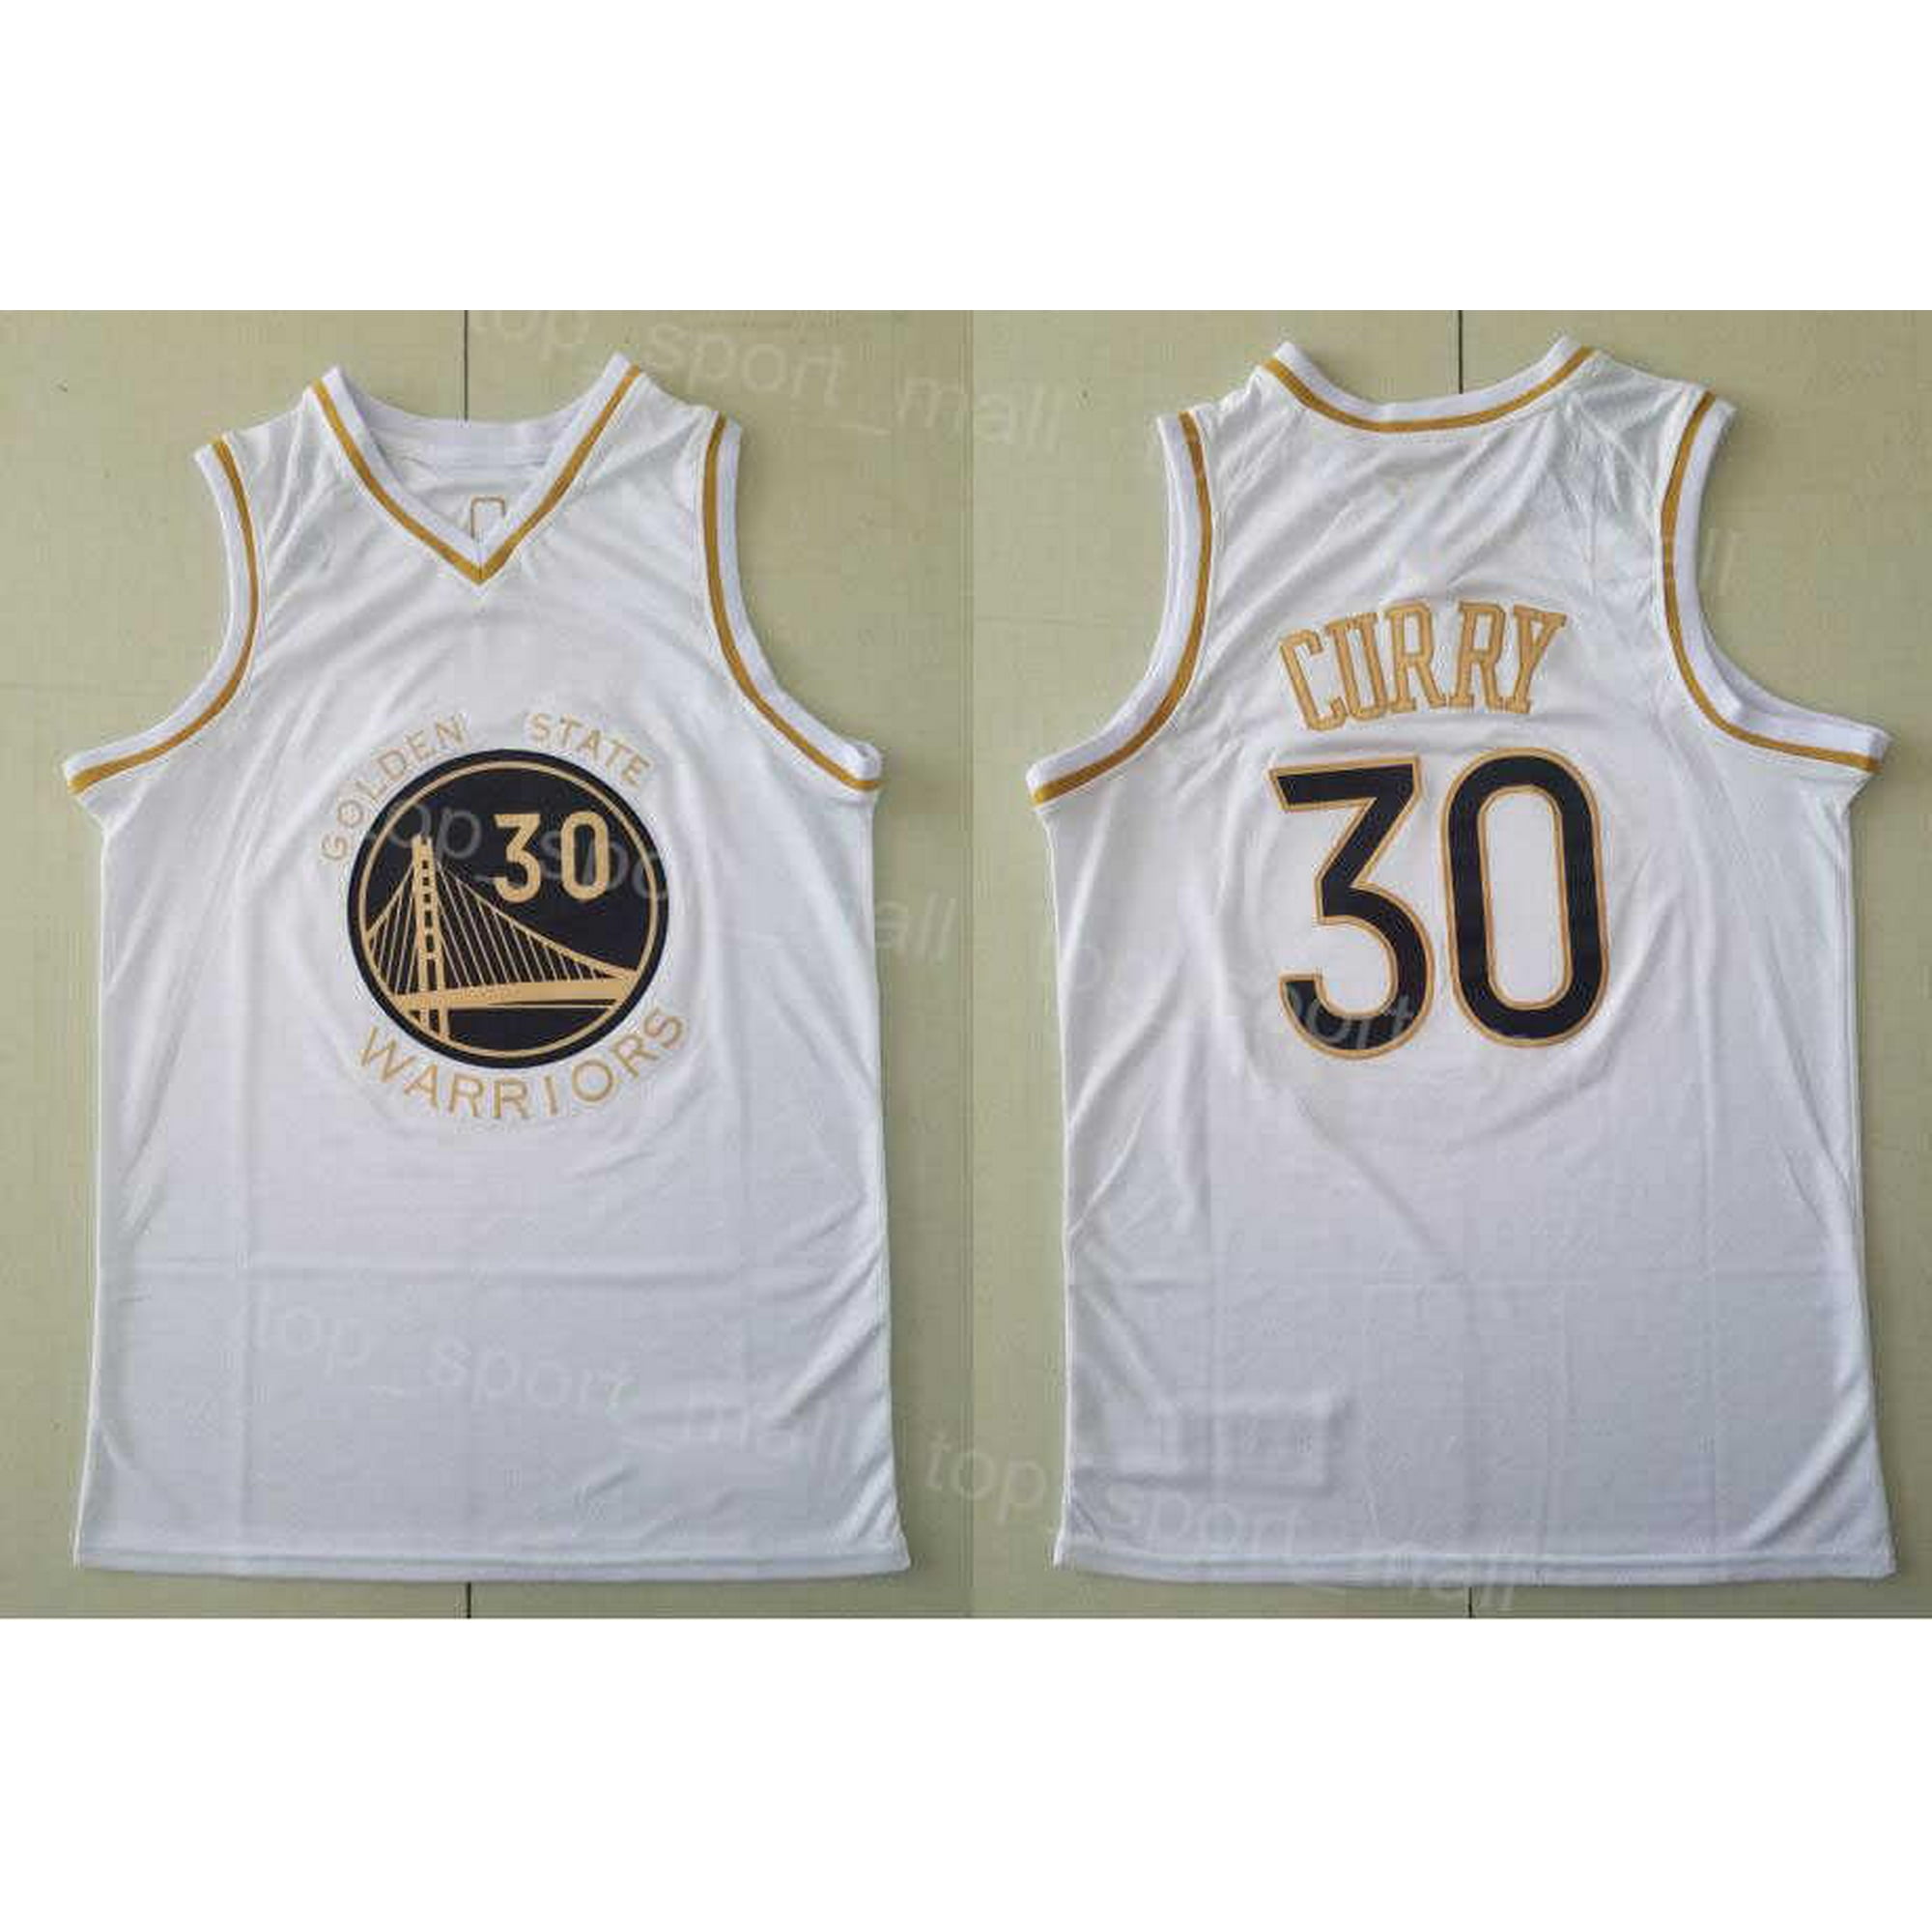 steph curry jersey black and yellow